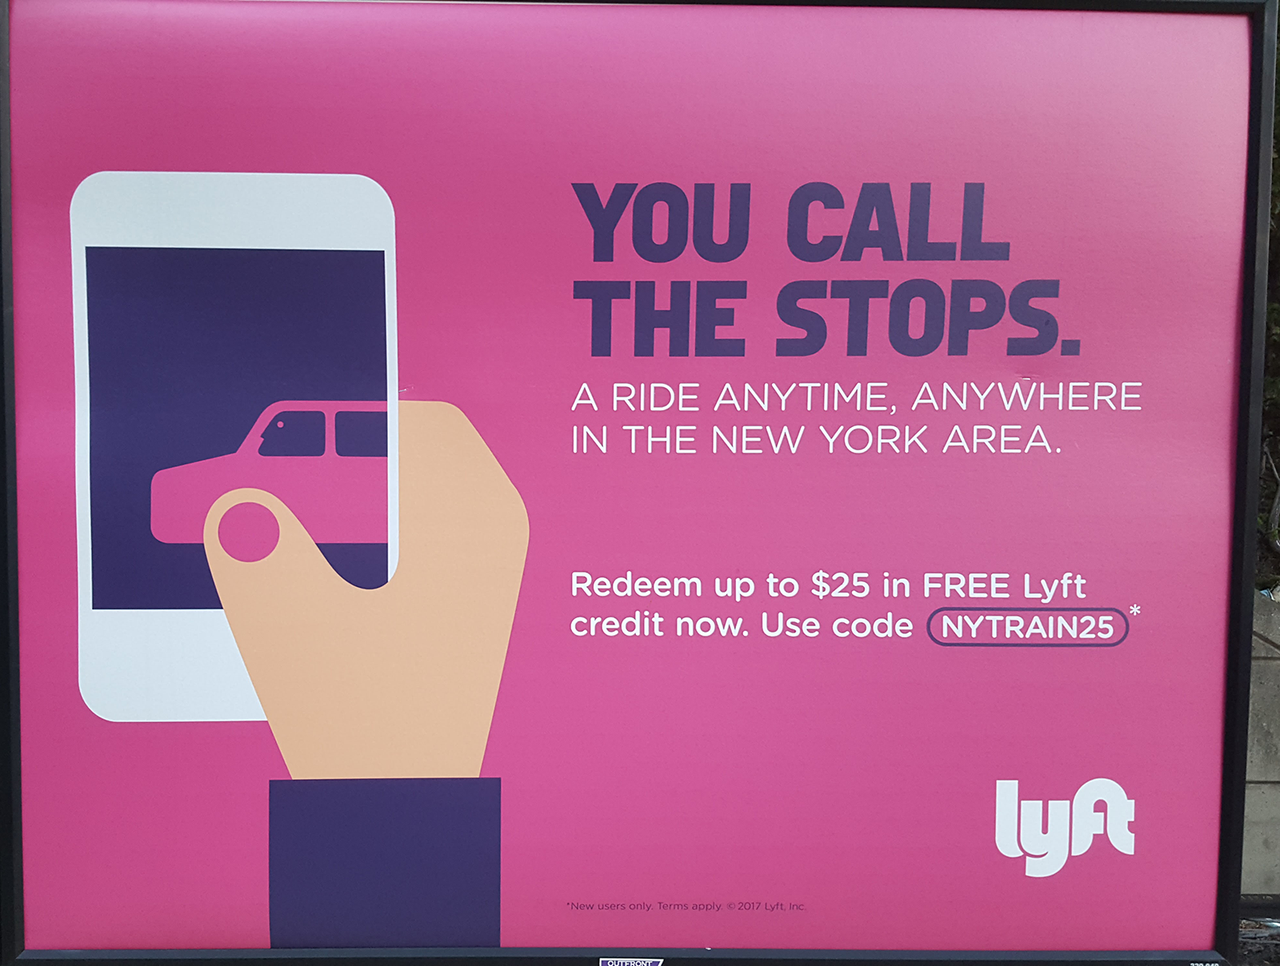 Lyft advertisement, announcing we can "Ride anytime, anywhere in the NYC area" with a $25 off discount code.